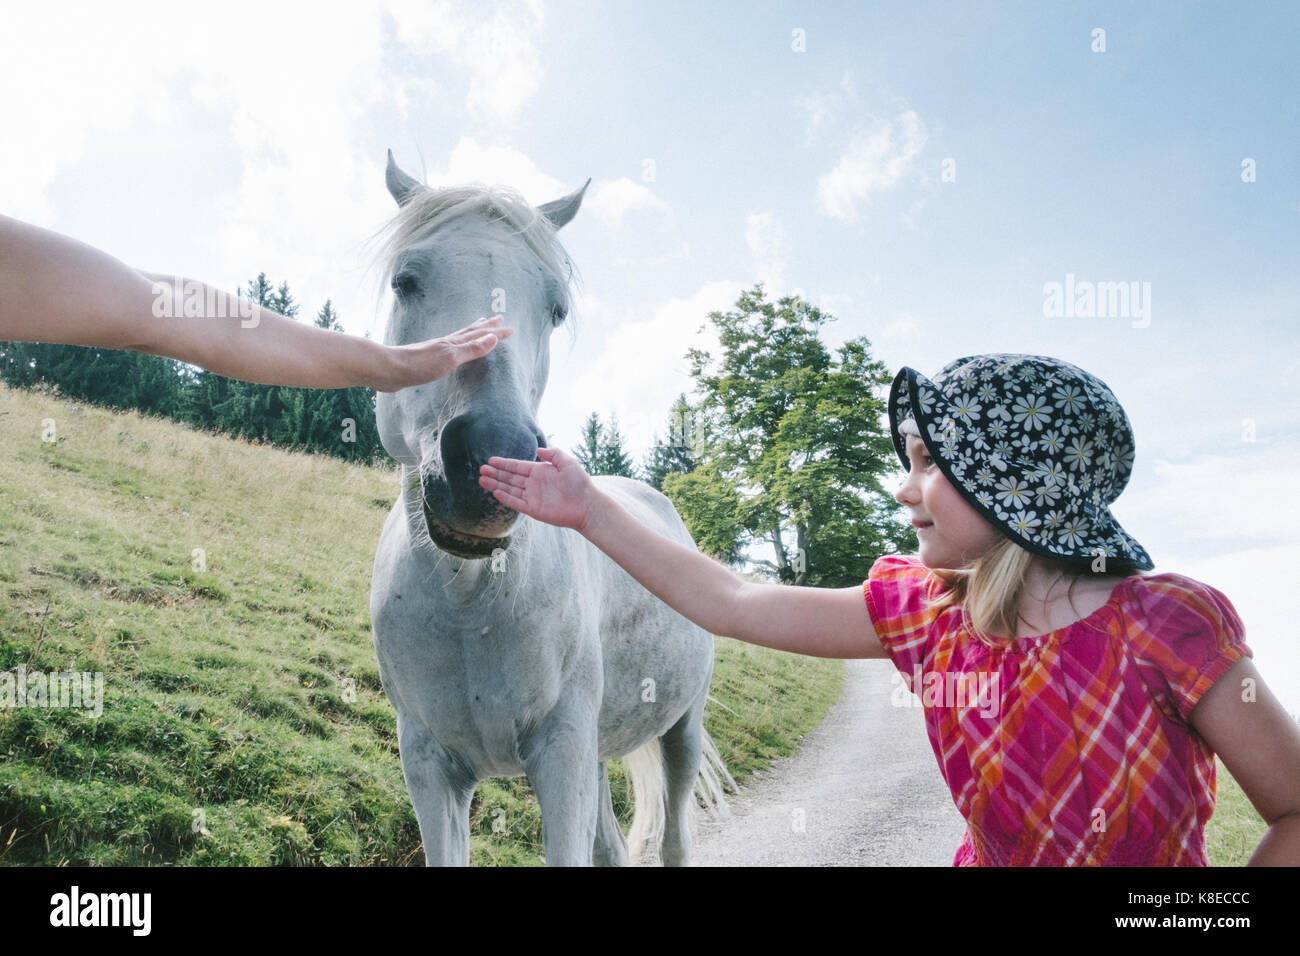 5 years old girl patting a white horse, Allgau, Alps, Germany Stock Photo